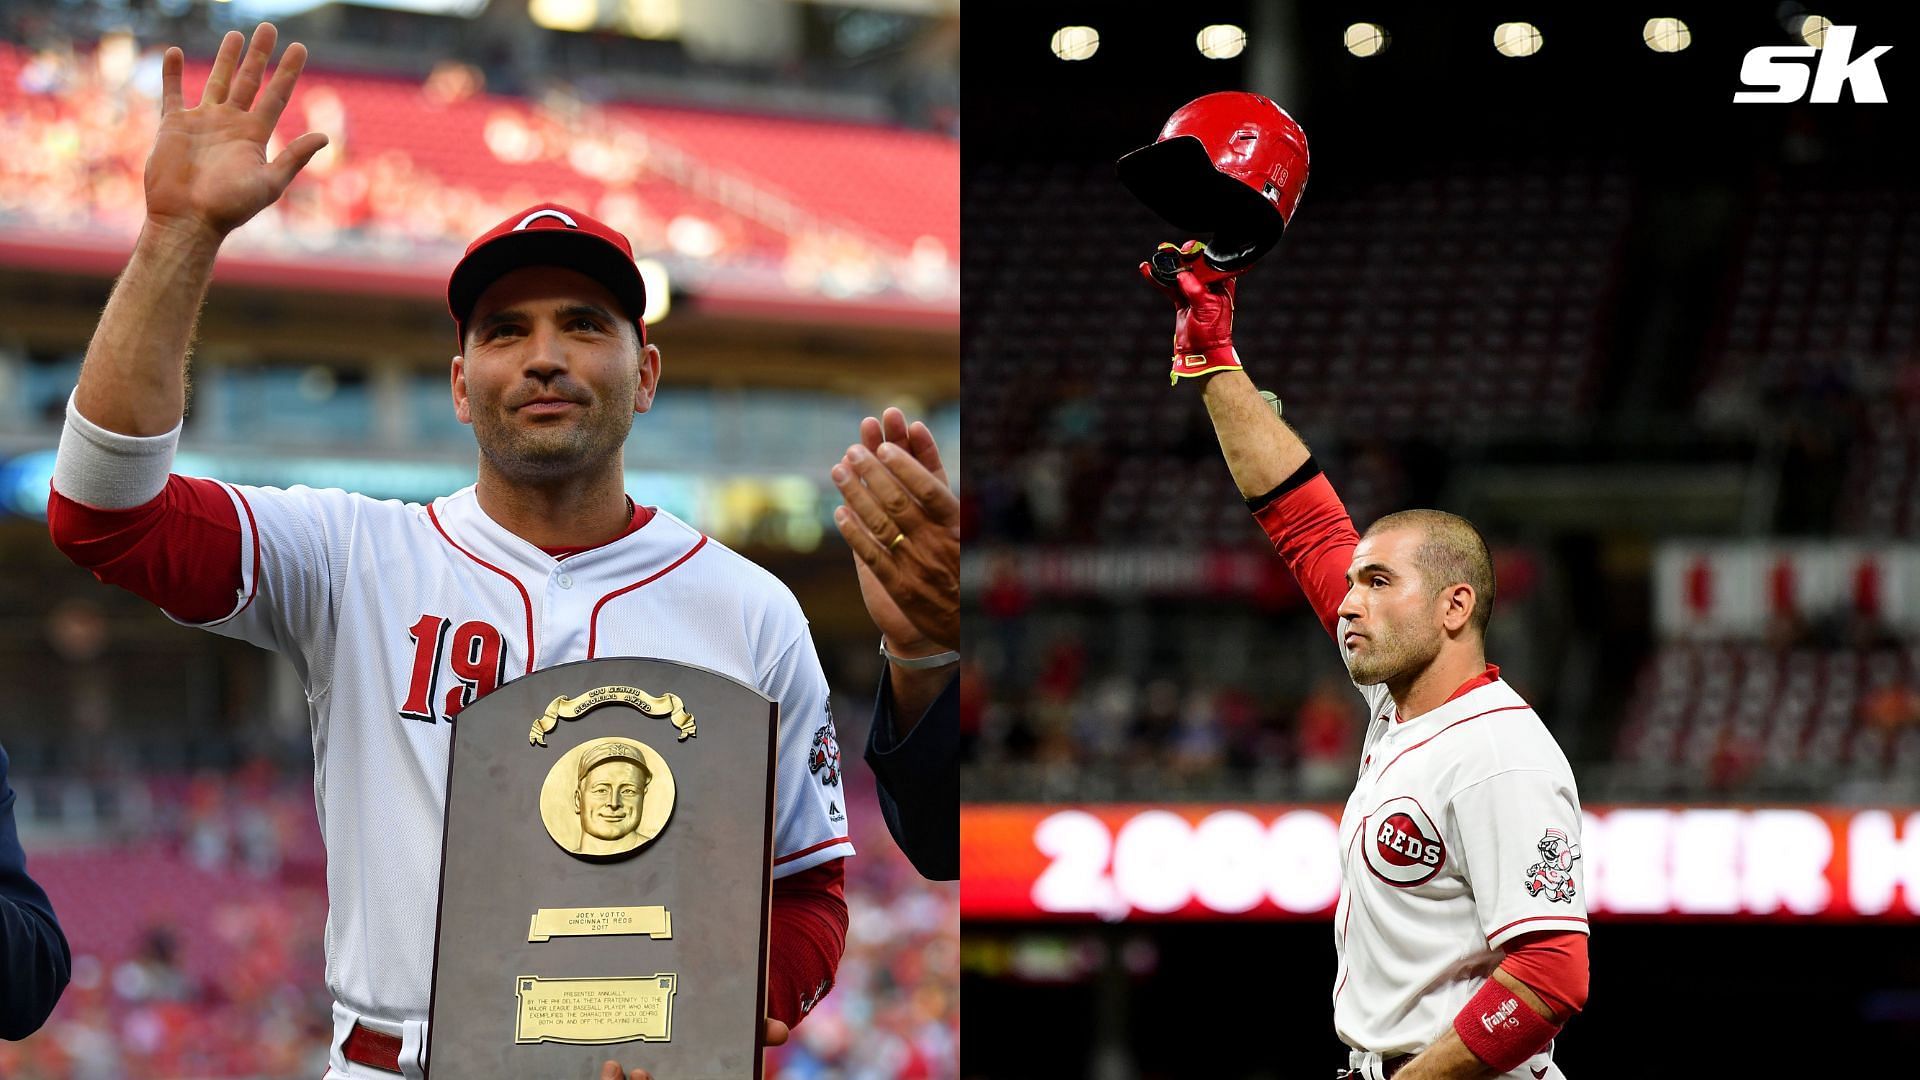 &ldquo;Six hours in the men&rsquo;s room&rdquo; - Joey Votto recalls hilarious anecdote from ESPN commercial shooting